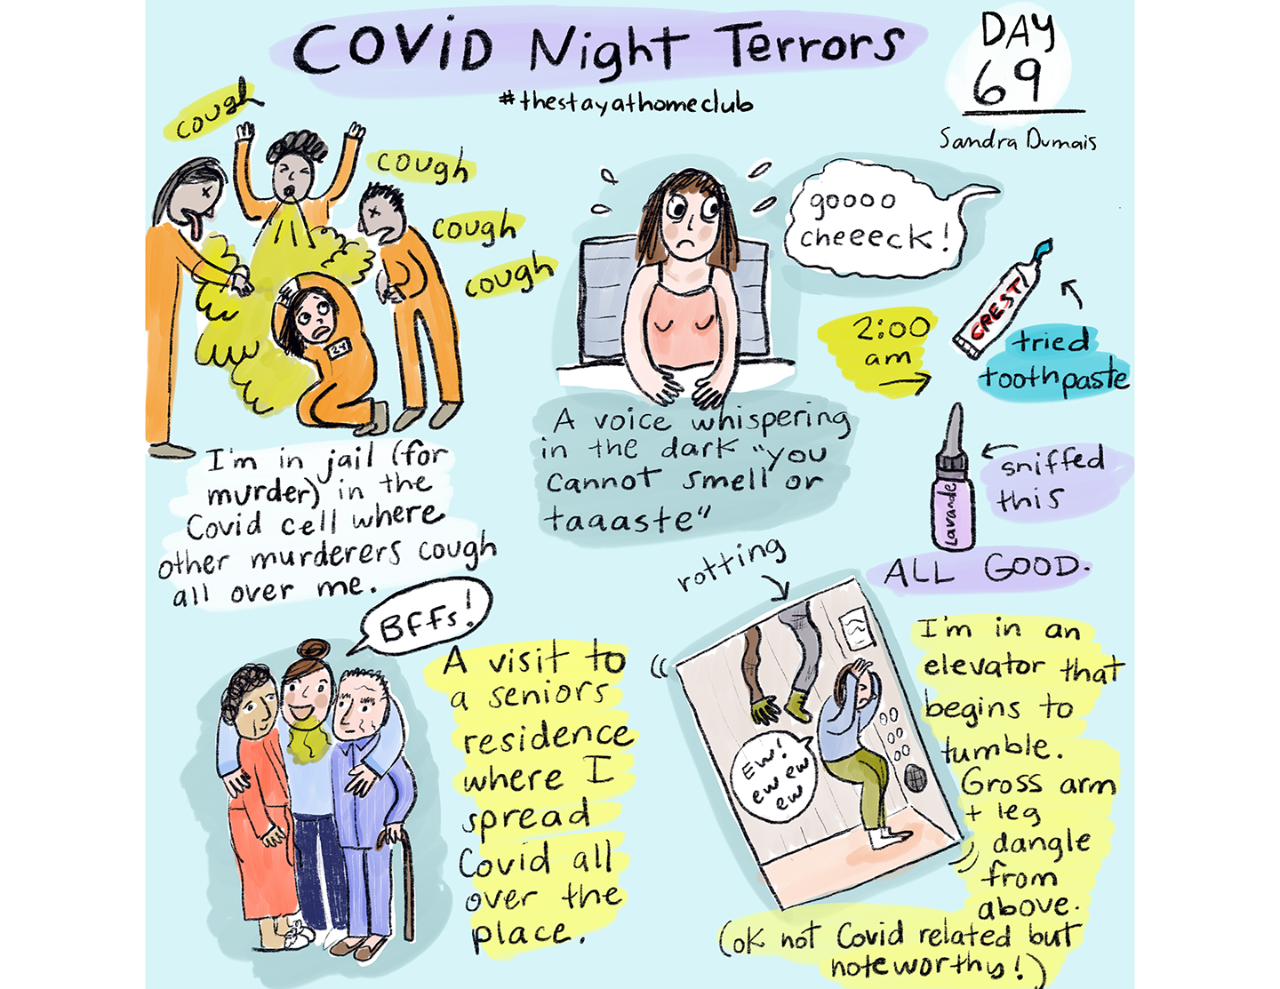 A comic titled “COVID Night Terrors” features drawings of different scary scenarios related to the COVID-19 pandemic.